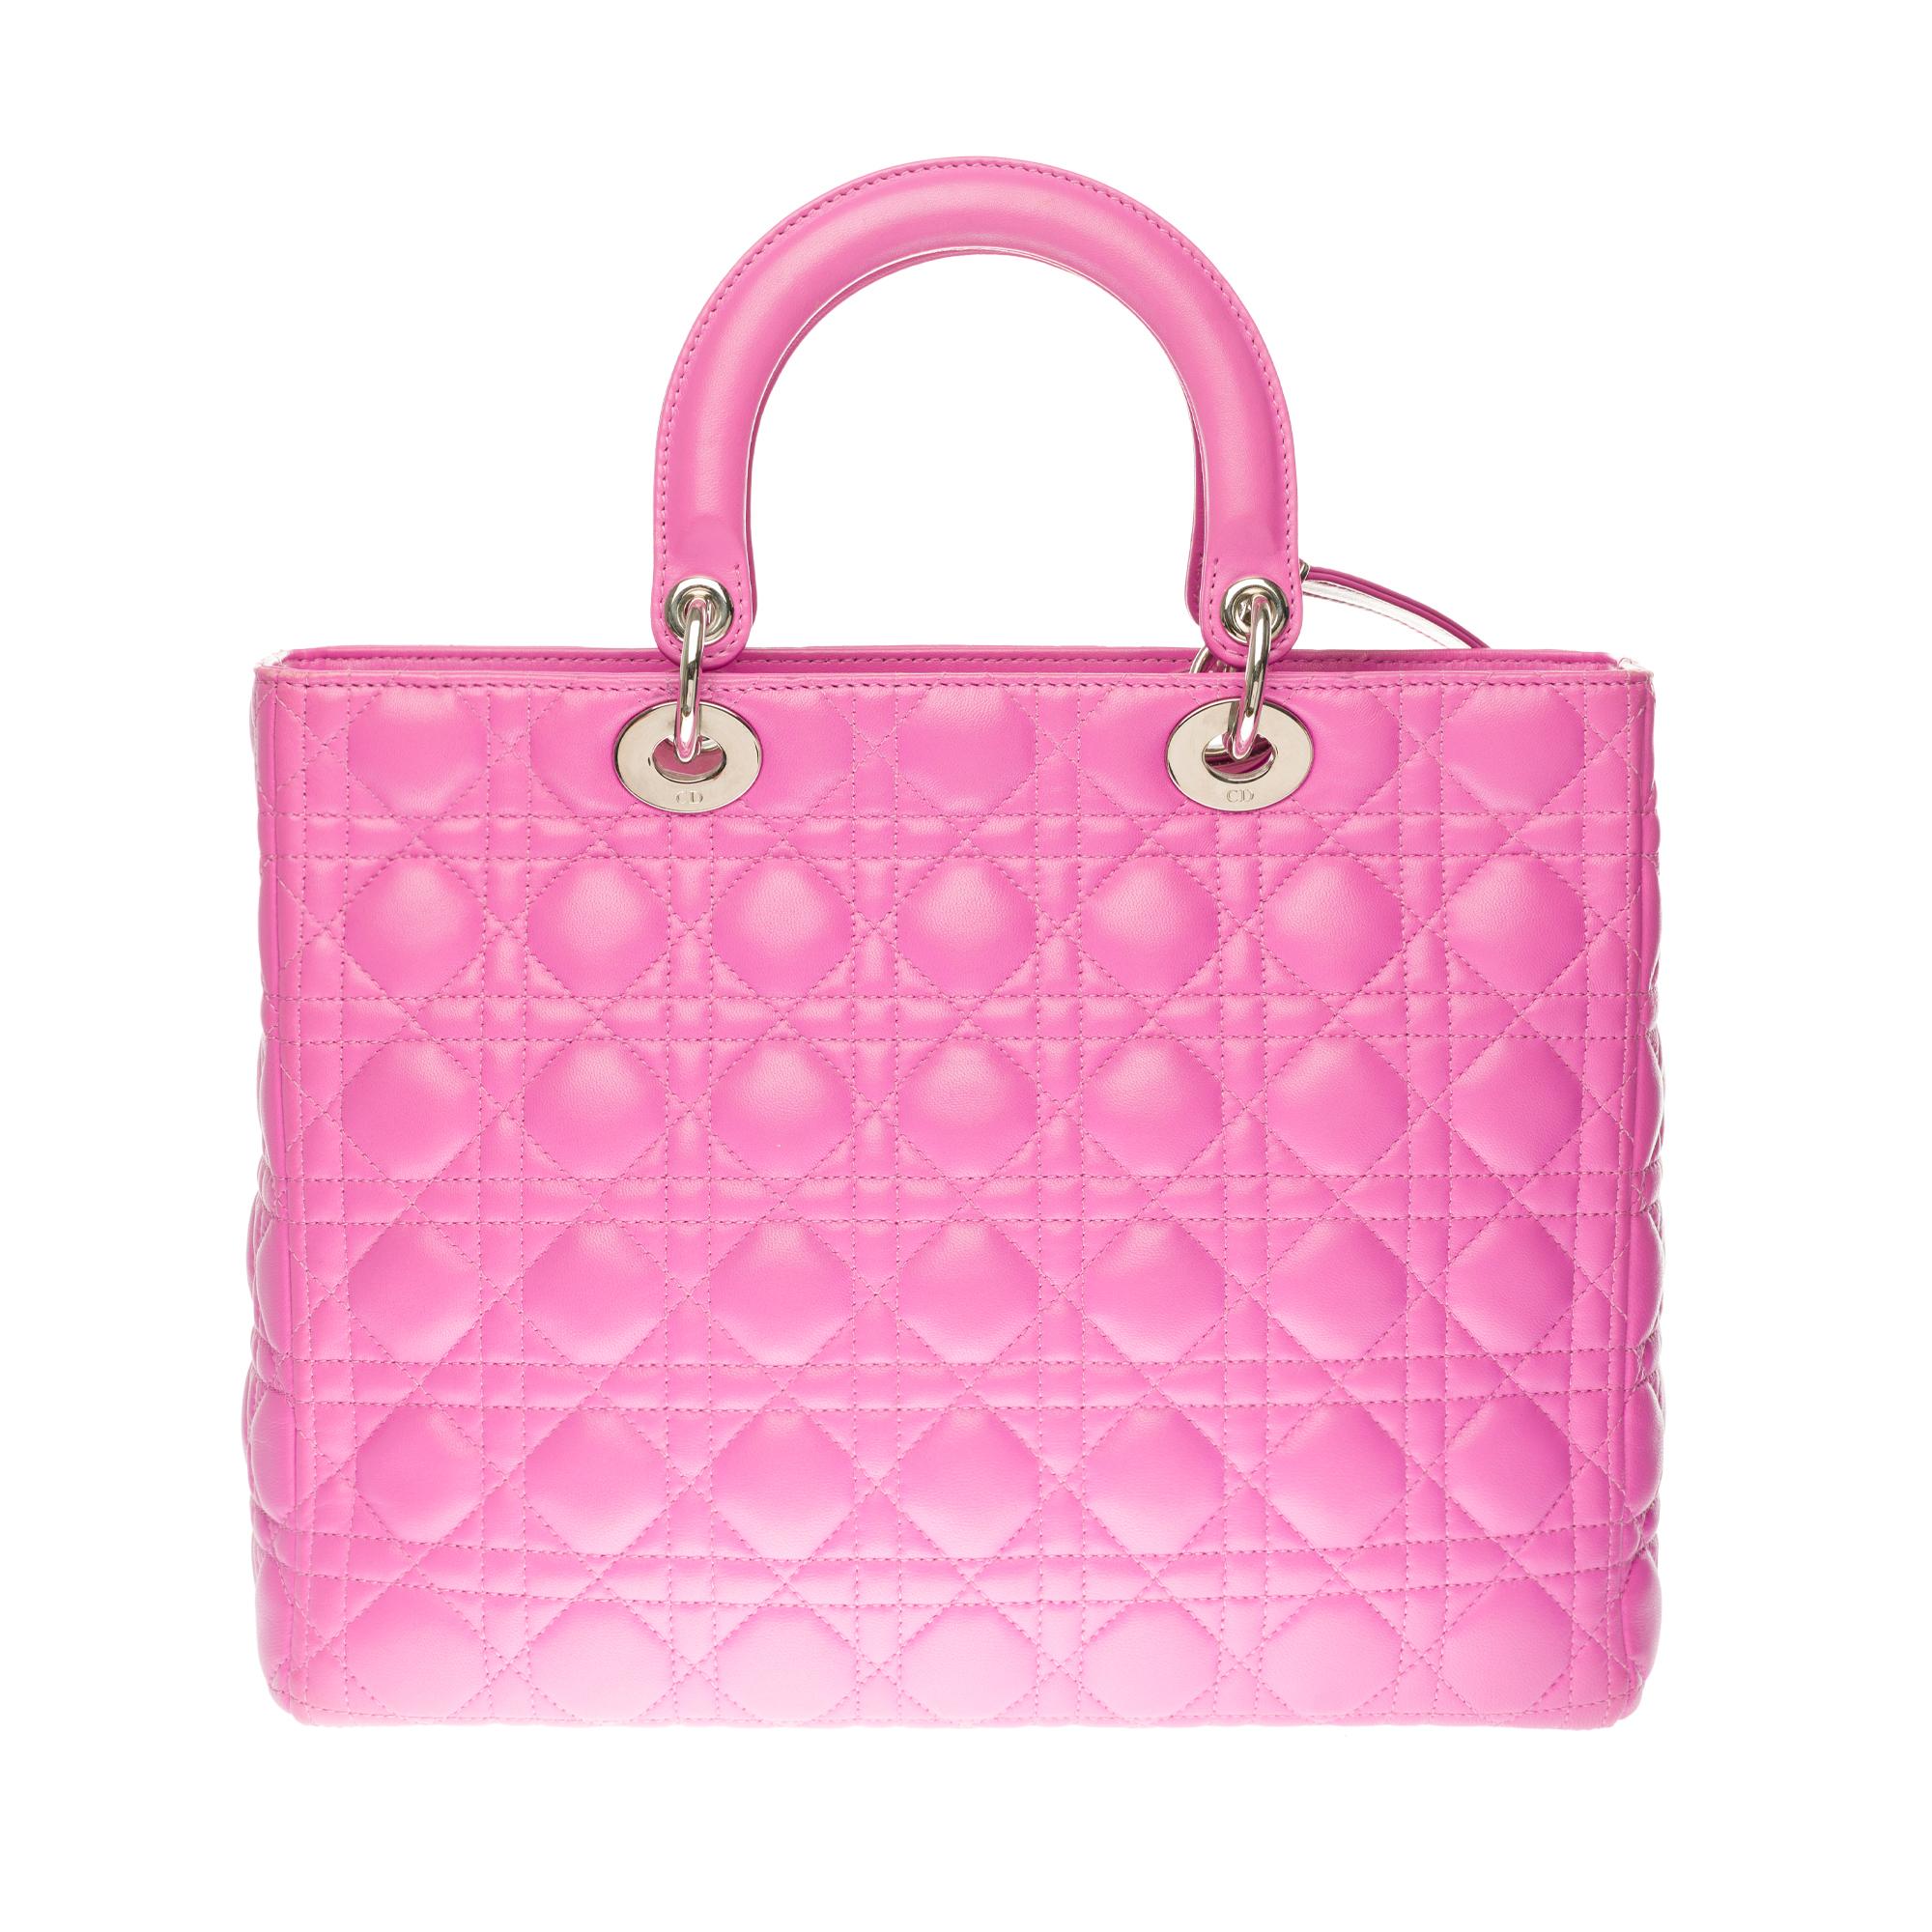 Very chic Dior Lady Dior large model (GM) shoulder bag in pink leather, silver metal hardware, double handle in pink leather, removable shoulder strap handle in pink leather allowing a hand or shoulder support or shoulder strap.

It’s a zip